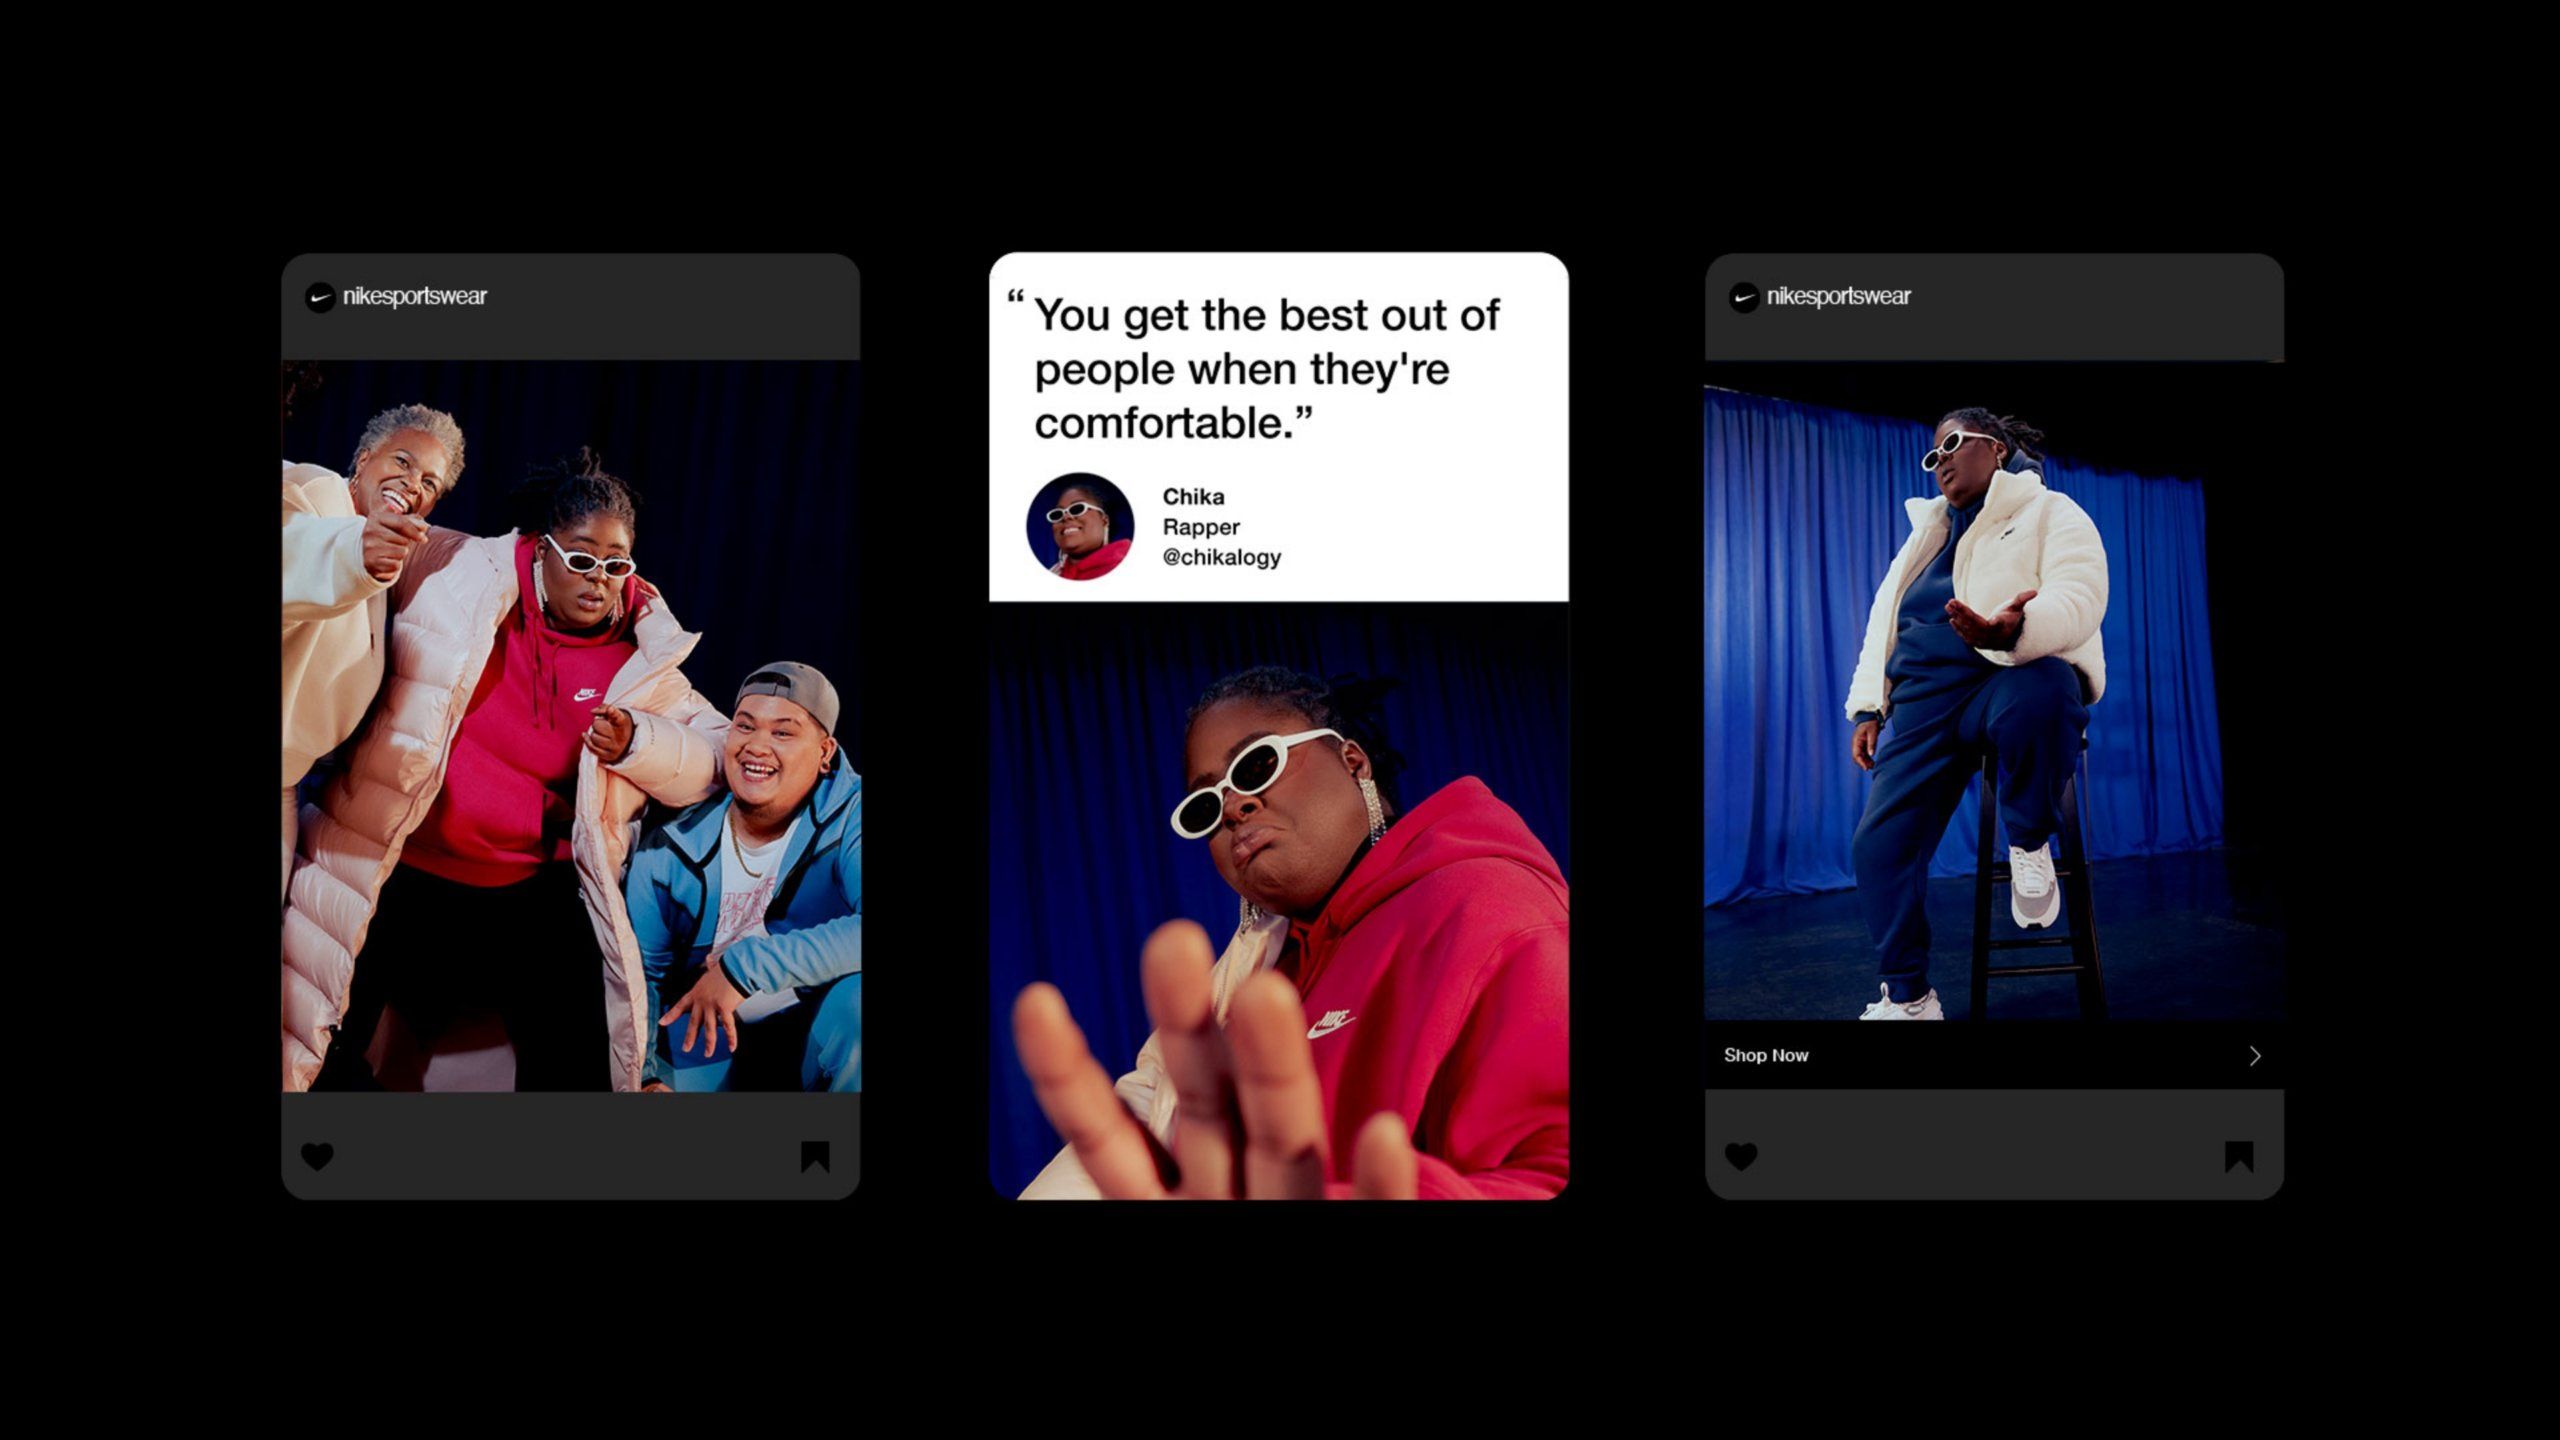 Three instagram posts featuring Chika, Rapper, posing with sunglasses and Nike Fleece clothing. You getht he best out of people when they're comfortable.